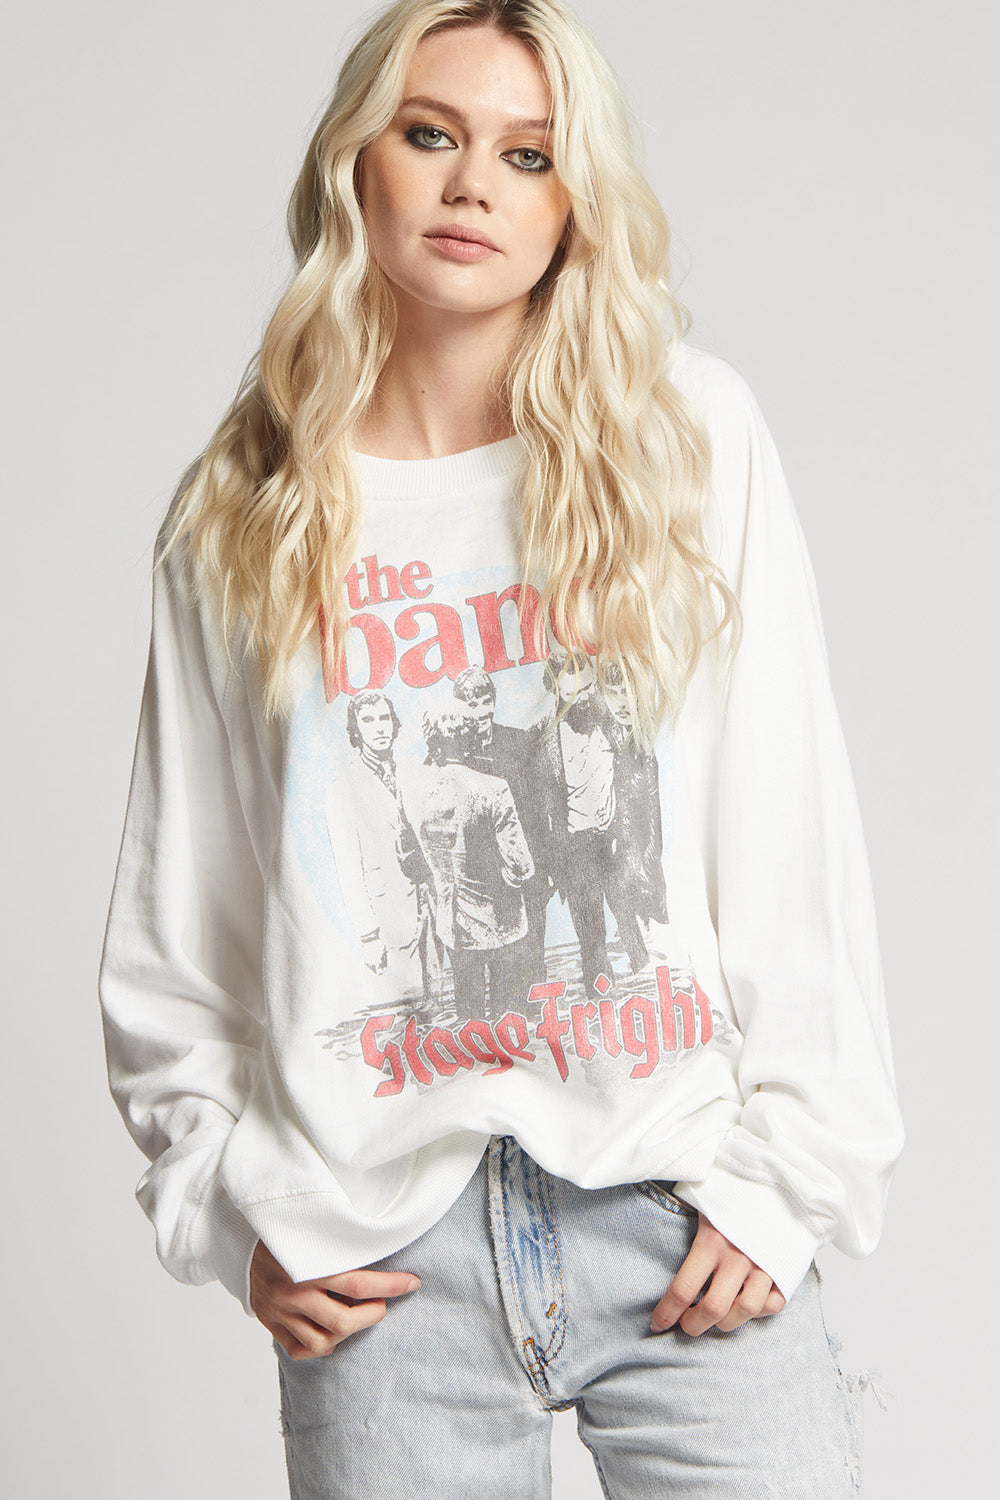 The Band Stage Fright 1970 Sweatshirt